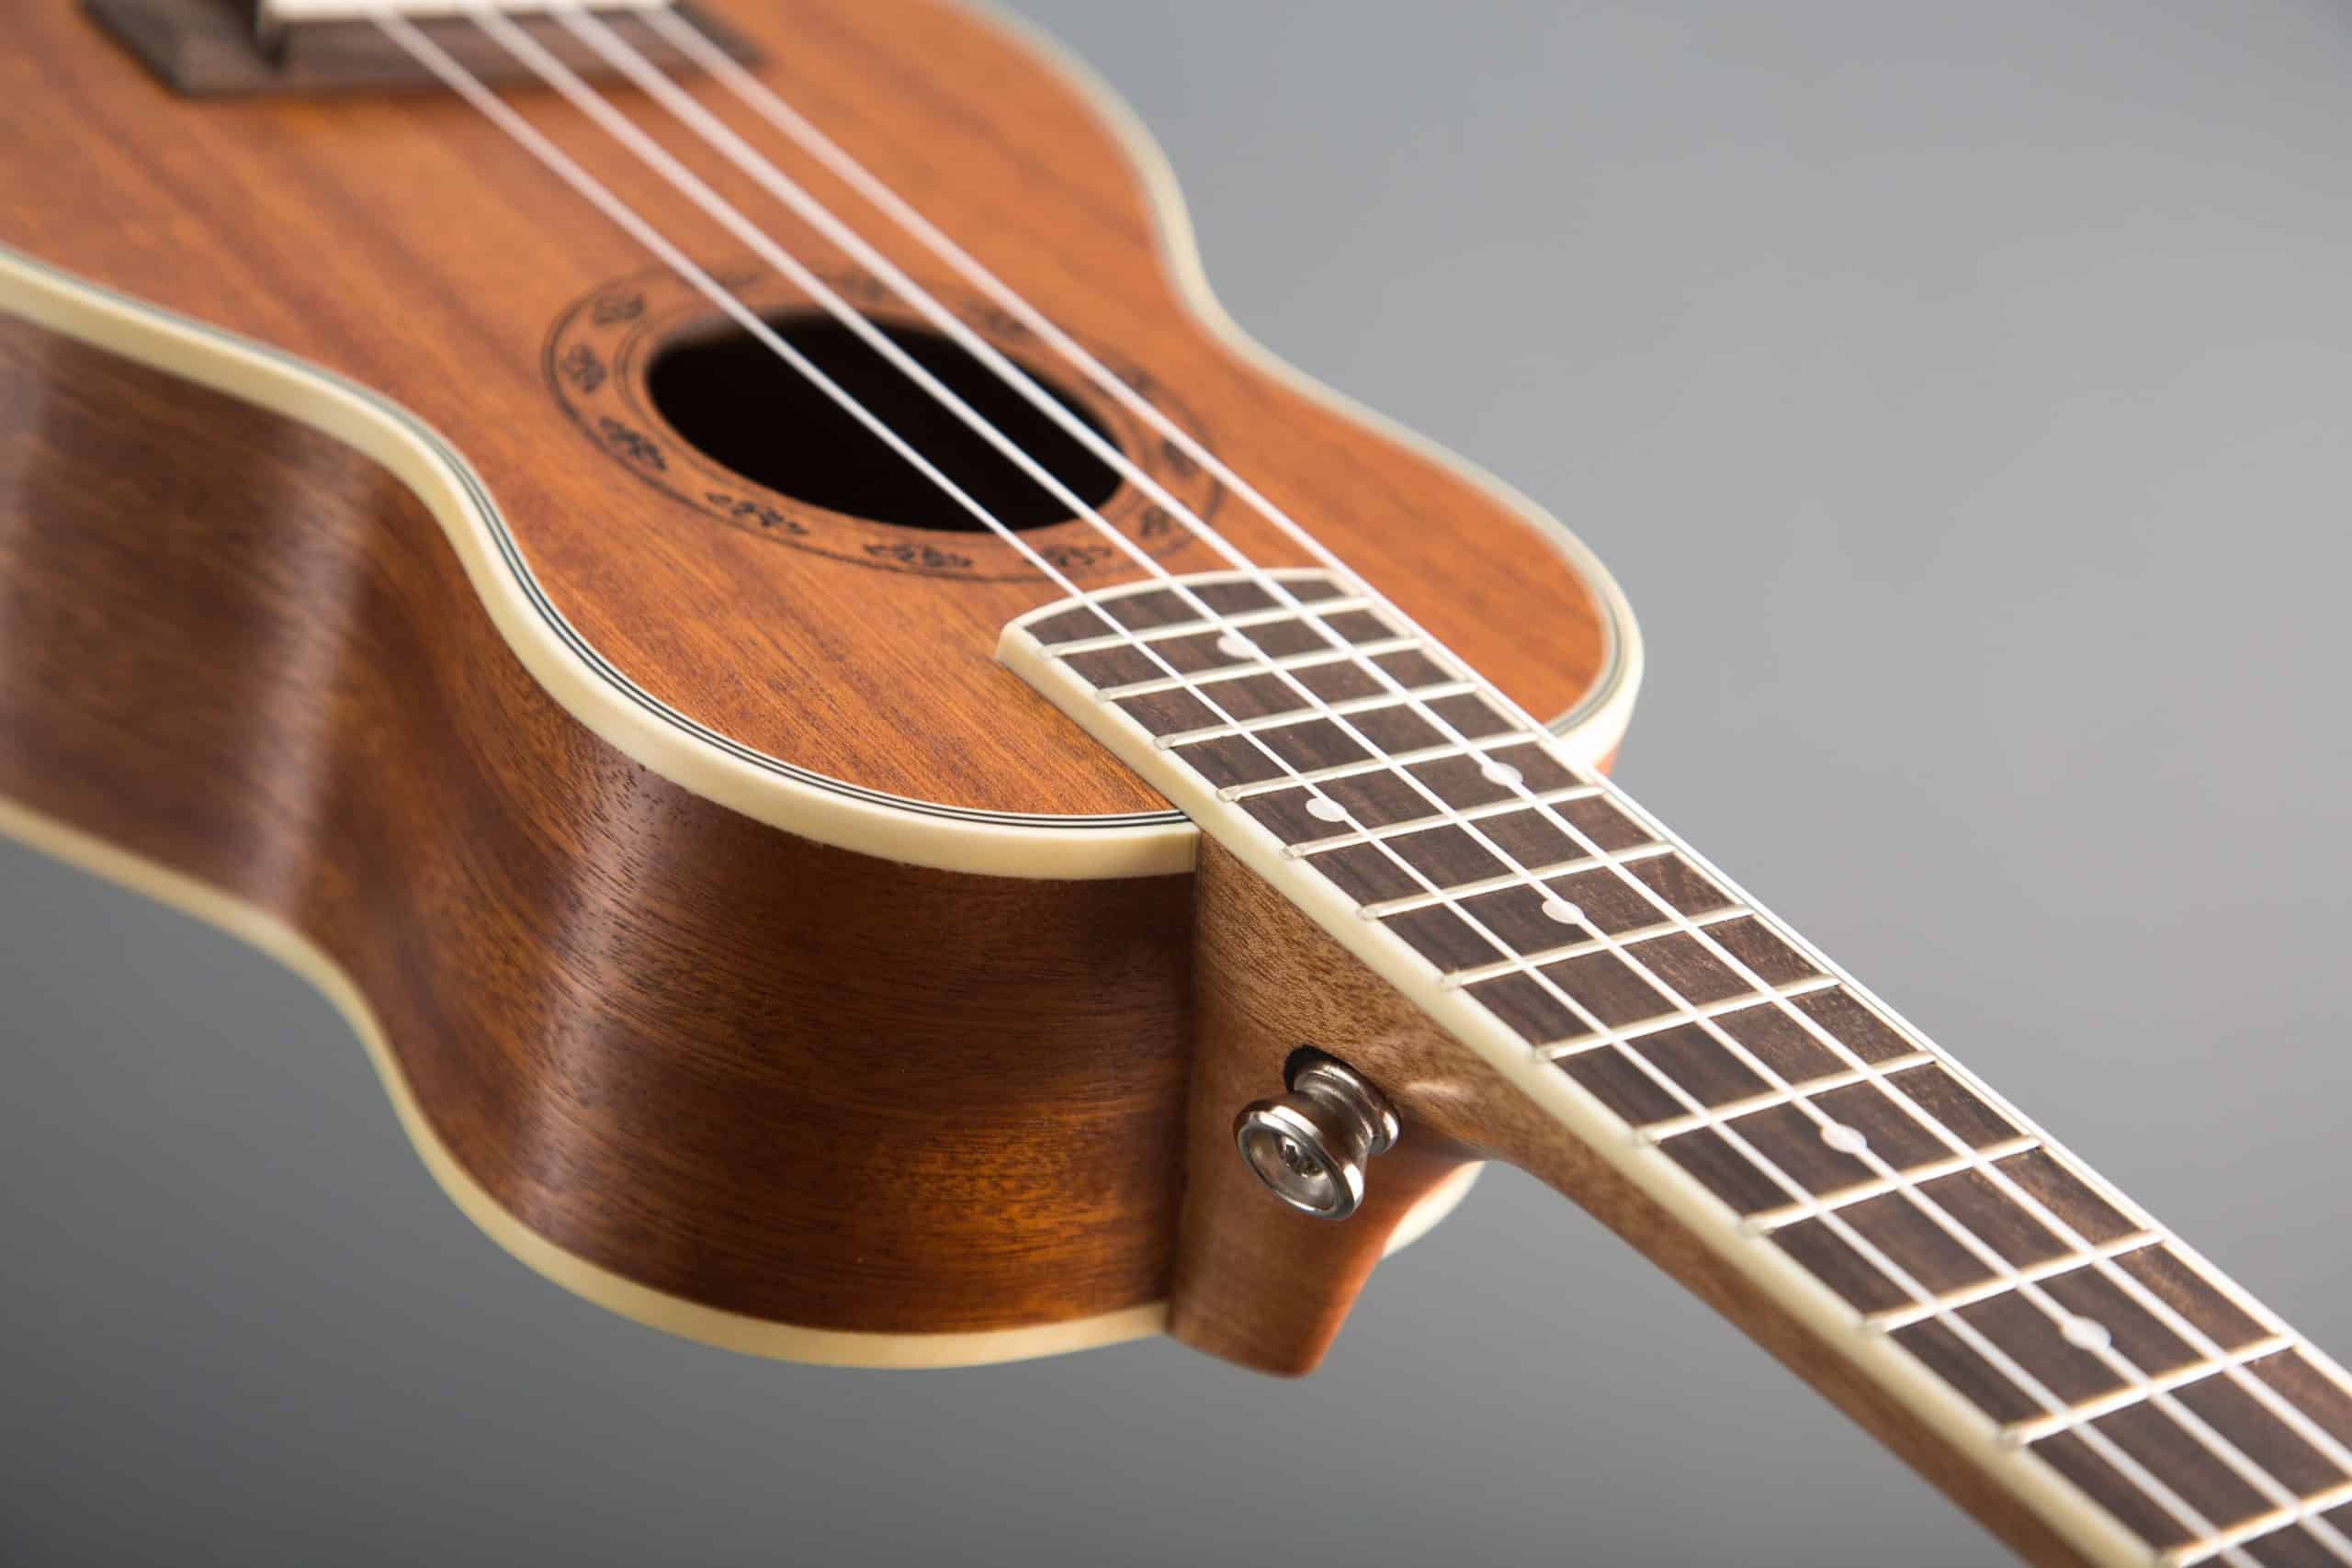 How to Change Ukulele Strings: Knots, Tips and Tricks